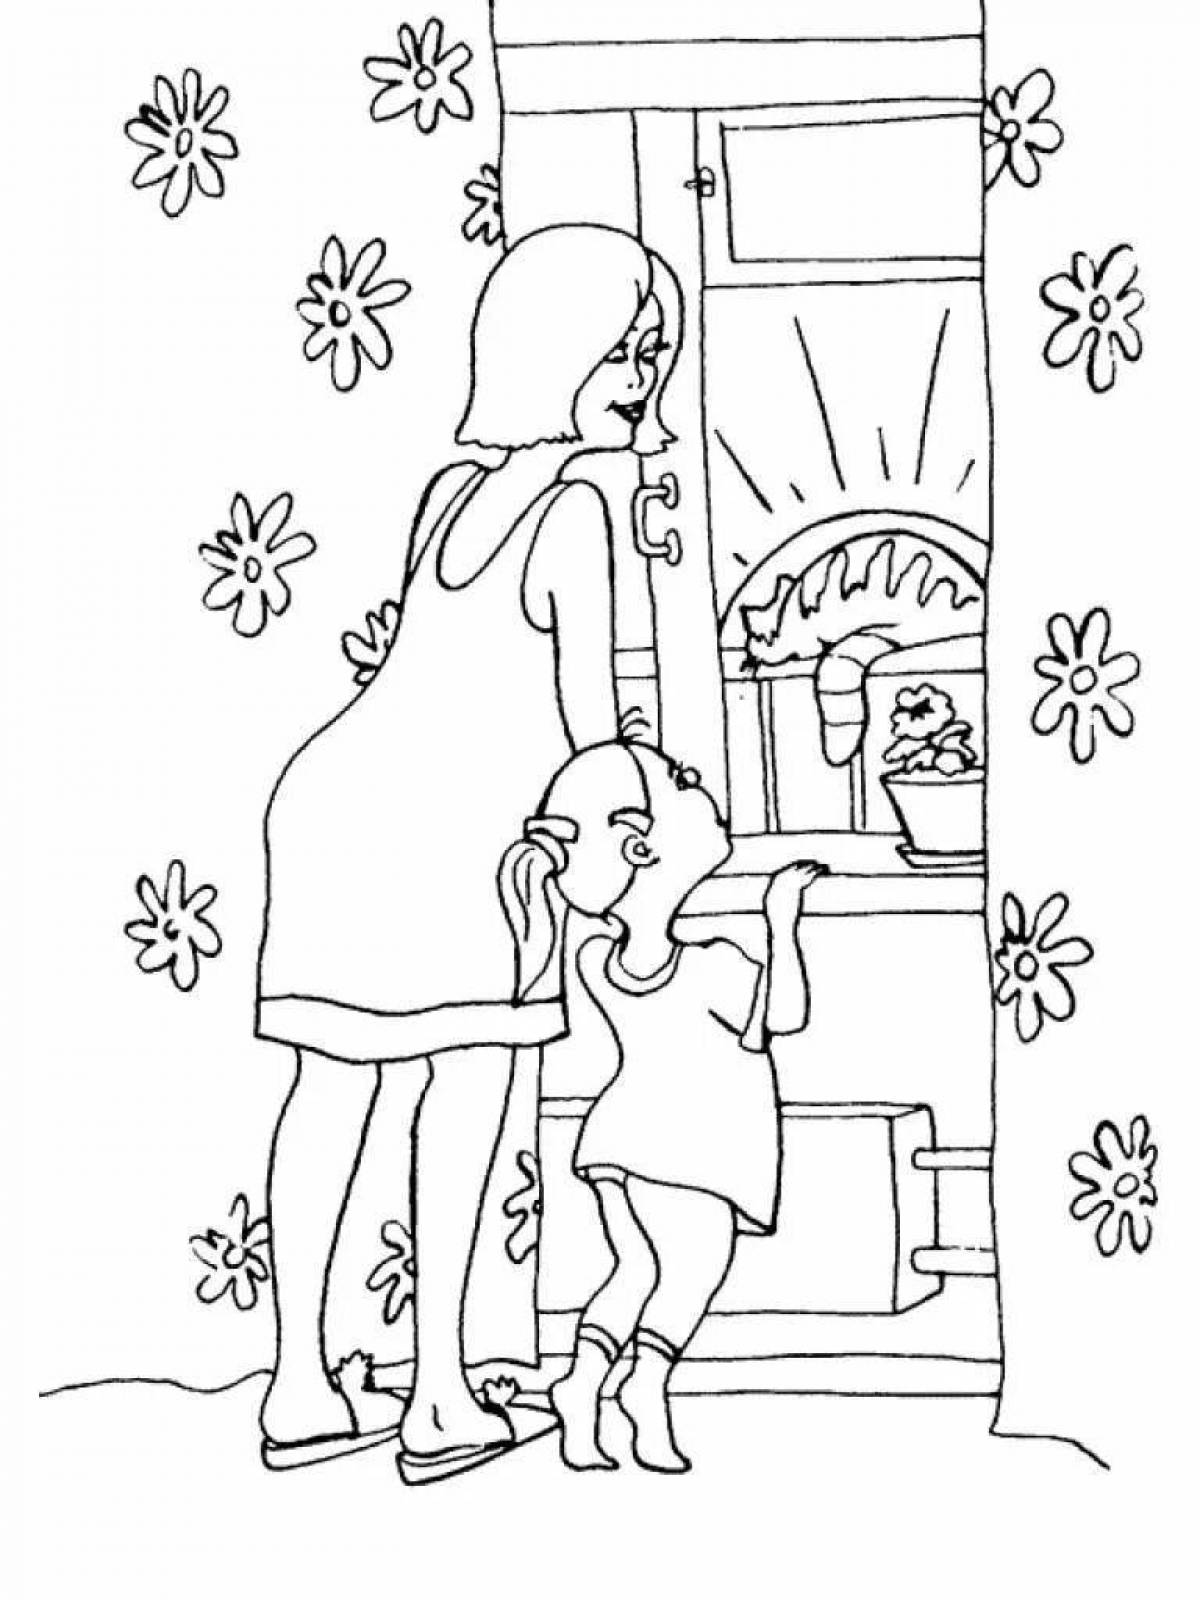 Great mommy and baby coloring book